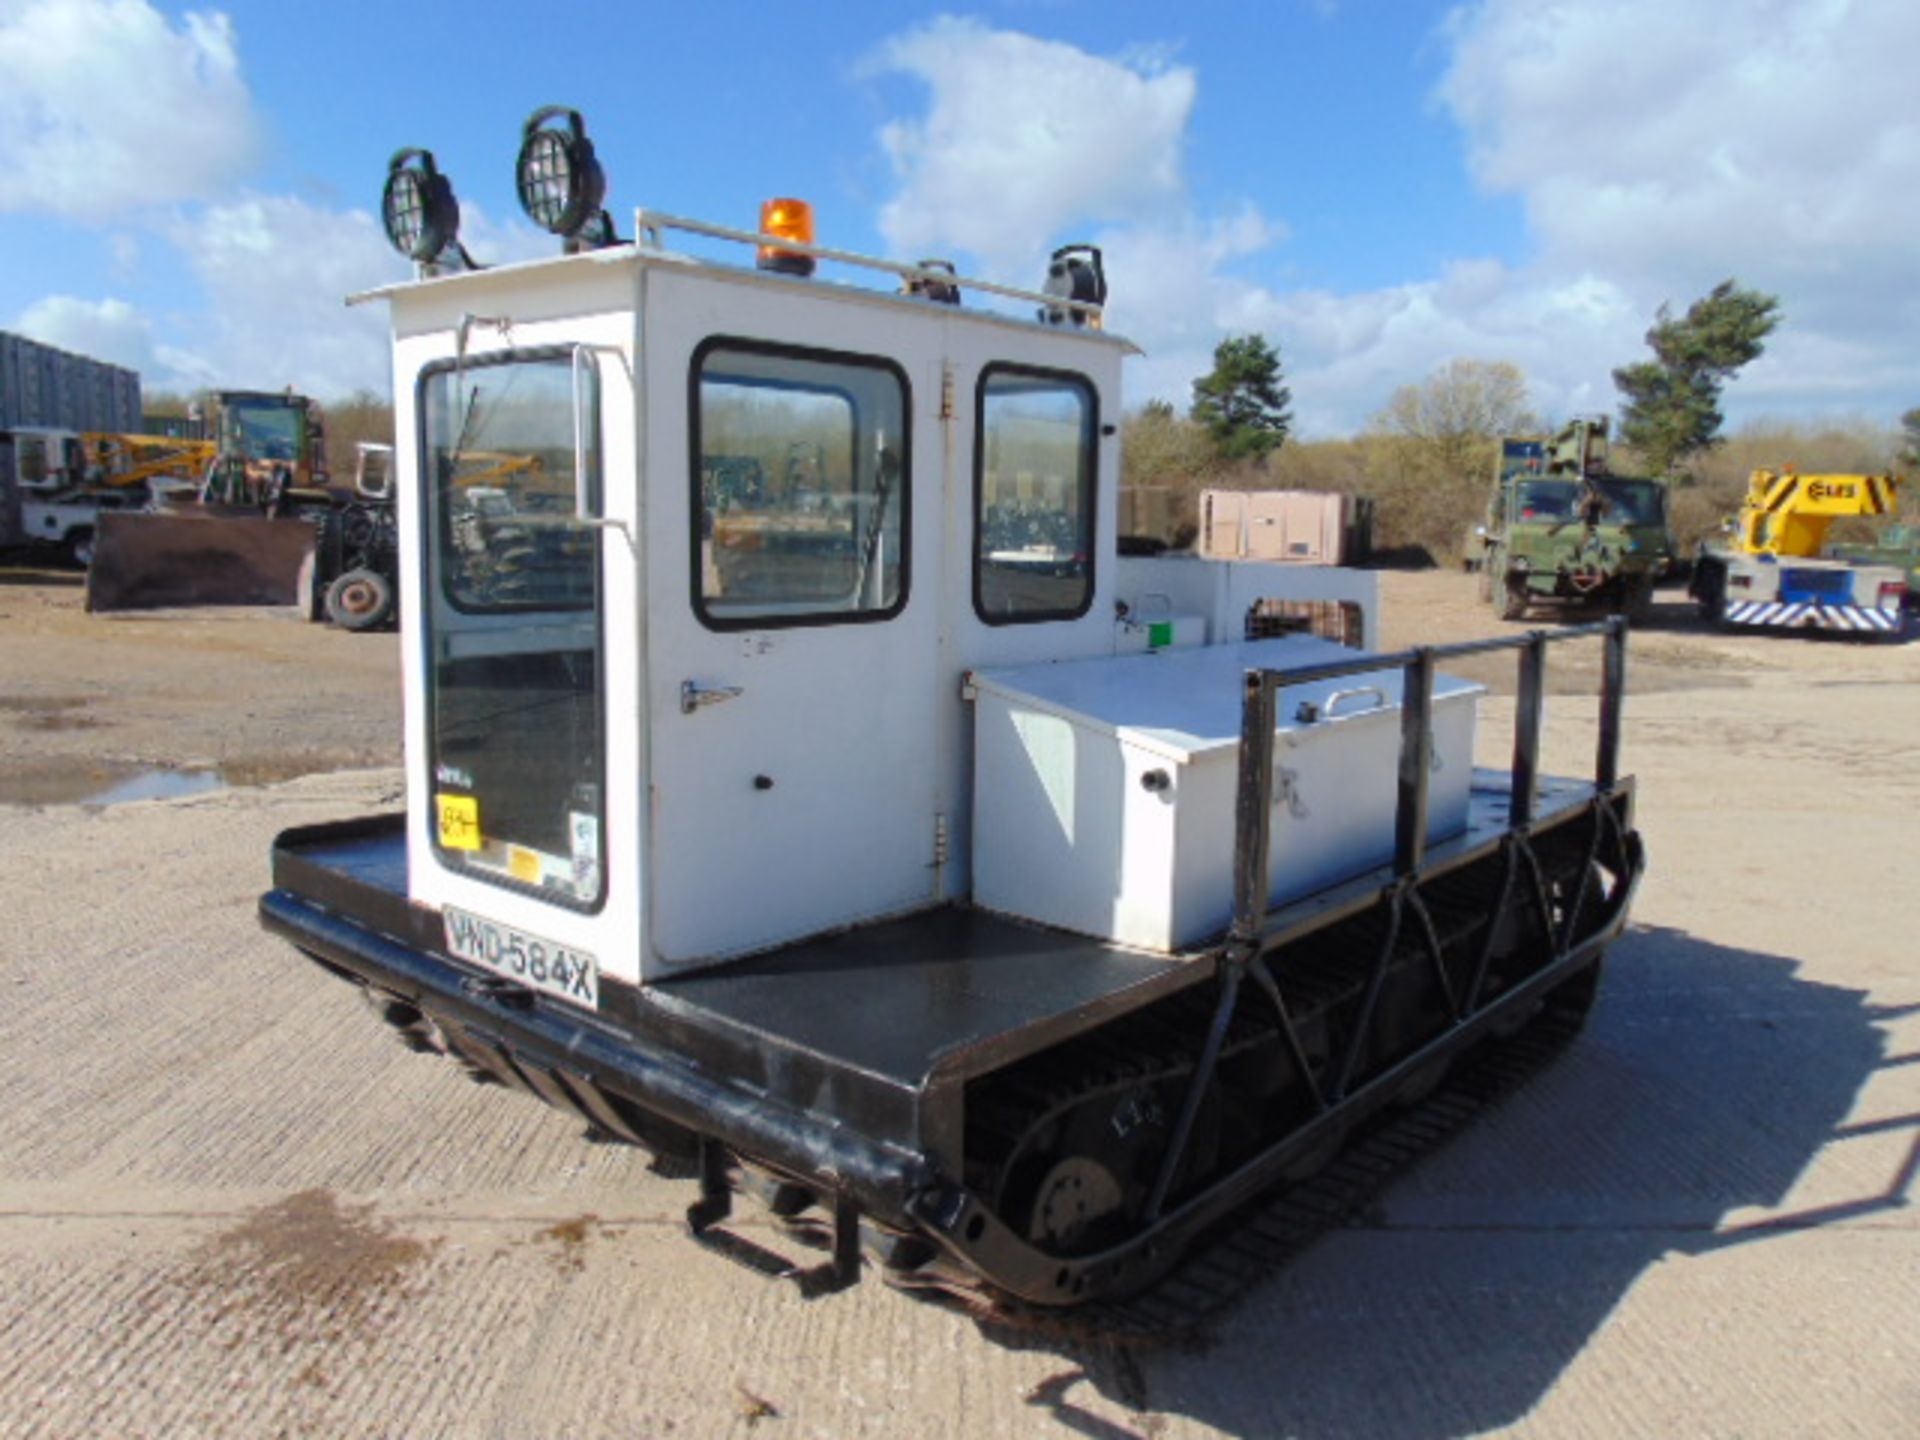 Rolba Bombardier Muskeg MM 80 All Terrain Tracked Vehicle with Rear Mounted Boughton Winch - Image 3 of 32